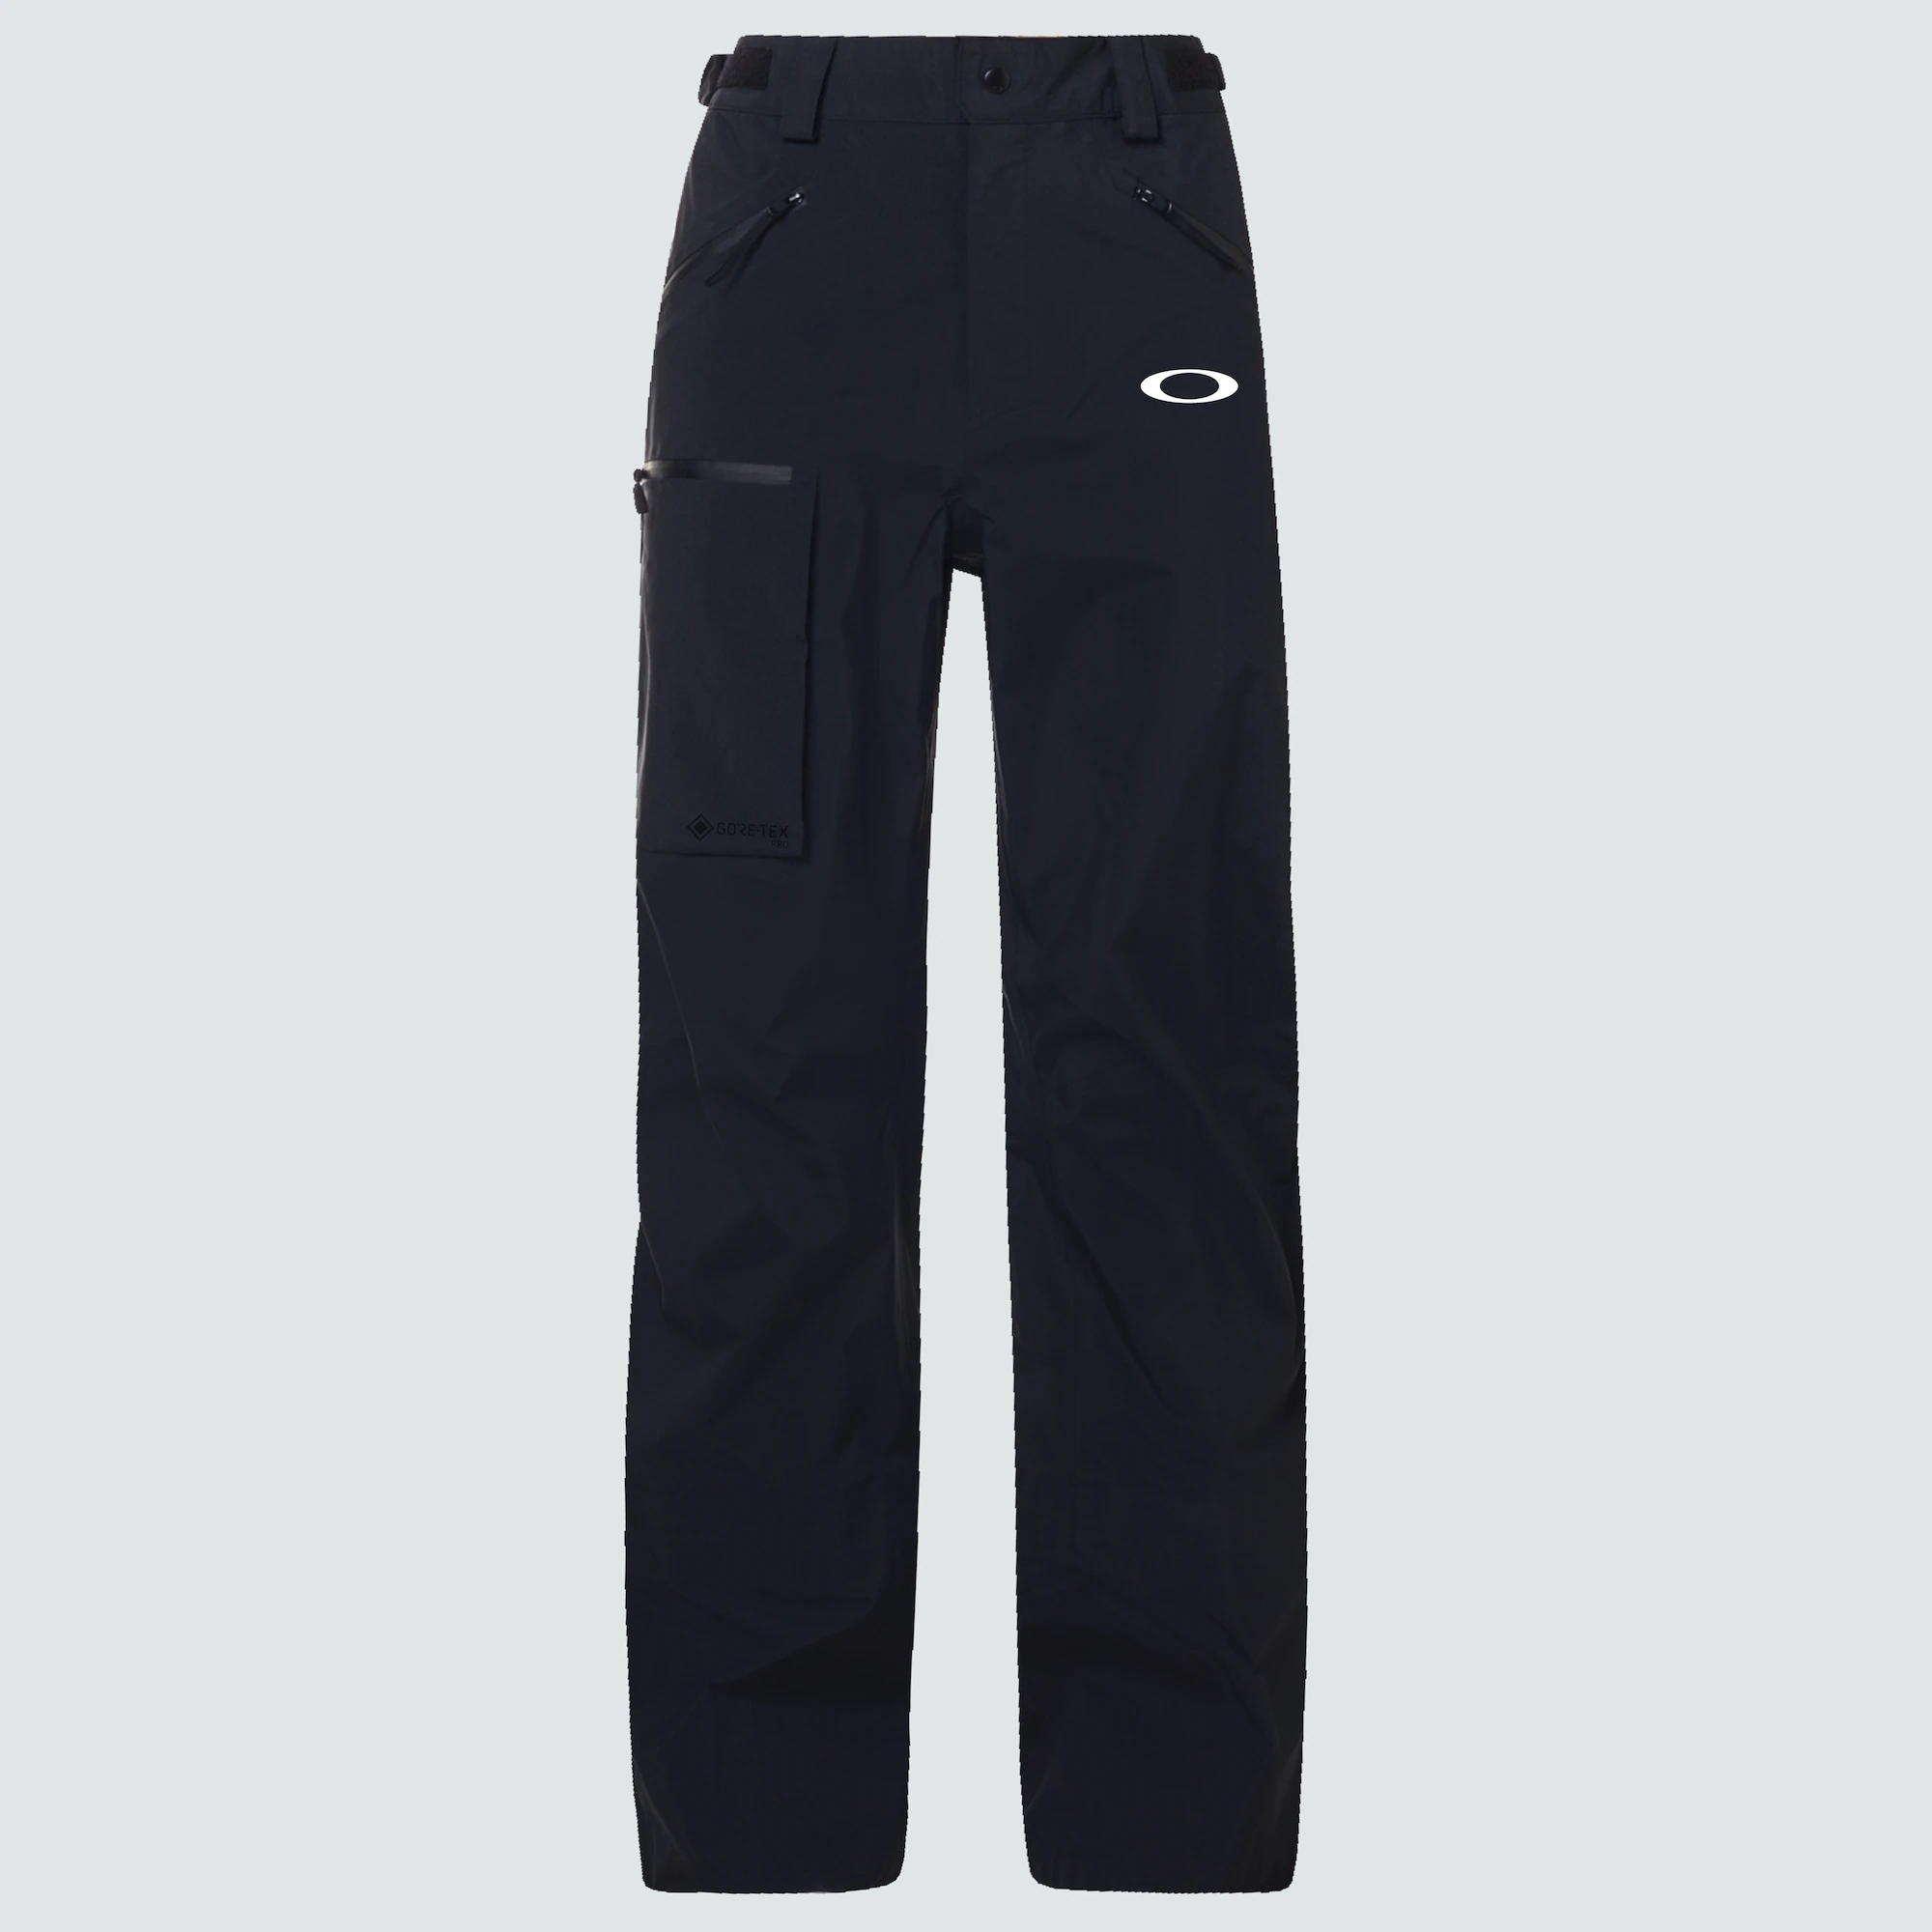 Bowls Gore-Tex Shell Pant Discounts and Cashback